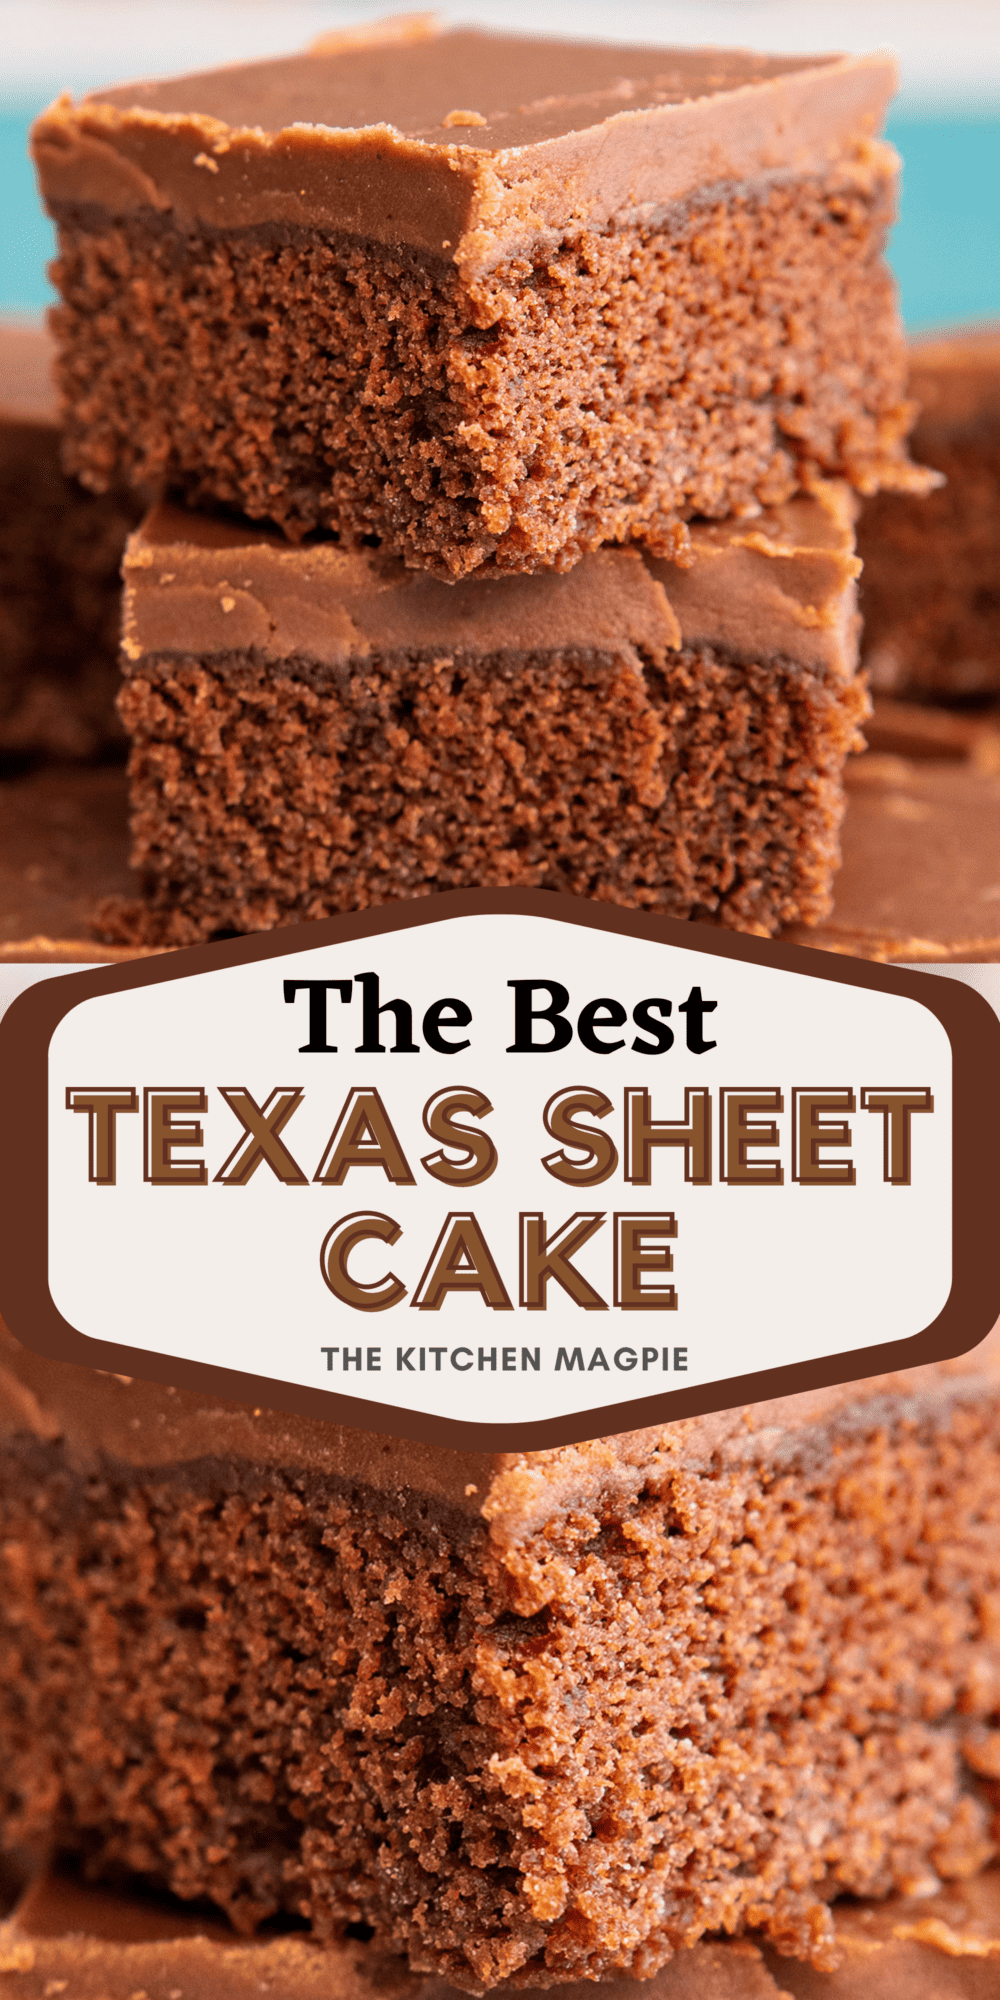 Classic Texas sheet cake! This rich, moist buttermilk chocolate cake has a hint of cinnamon and is topped with a fudgy chocolate glaze.